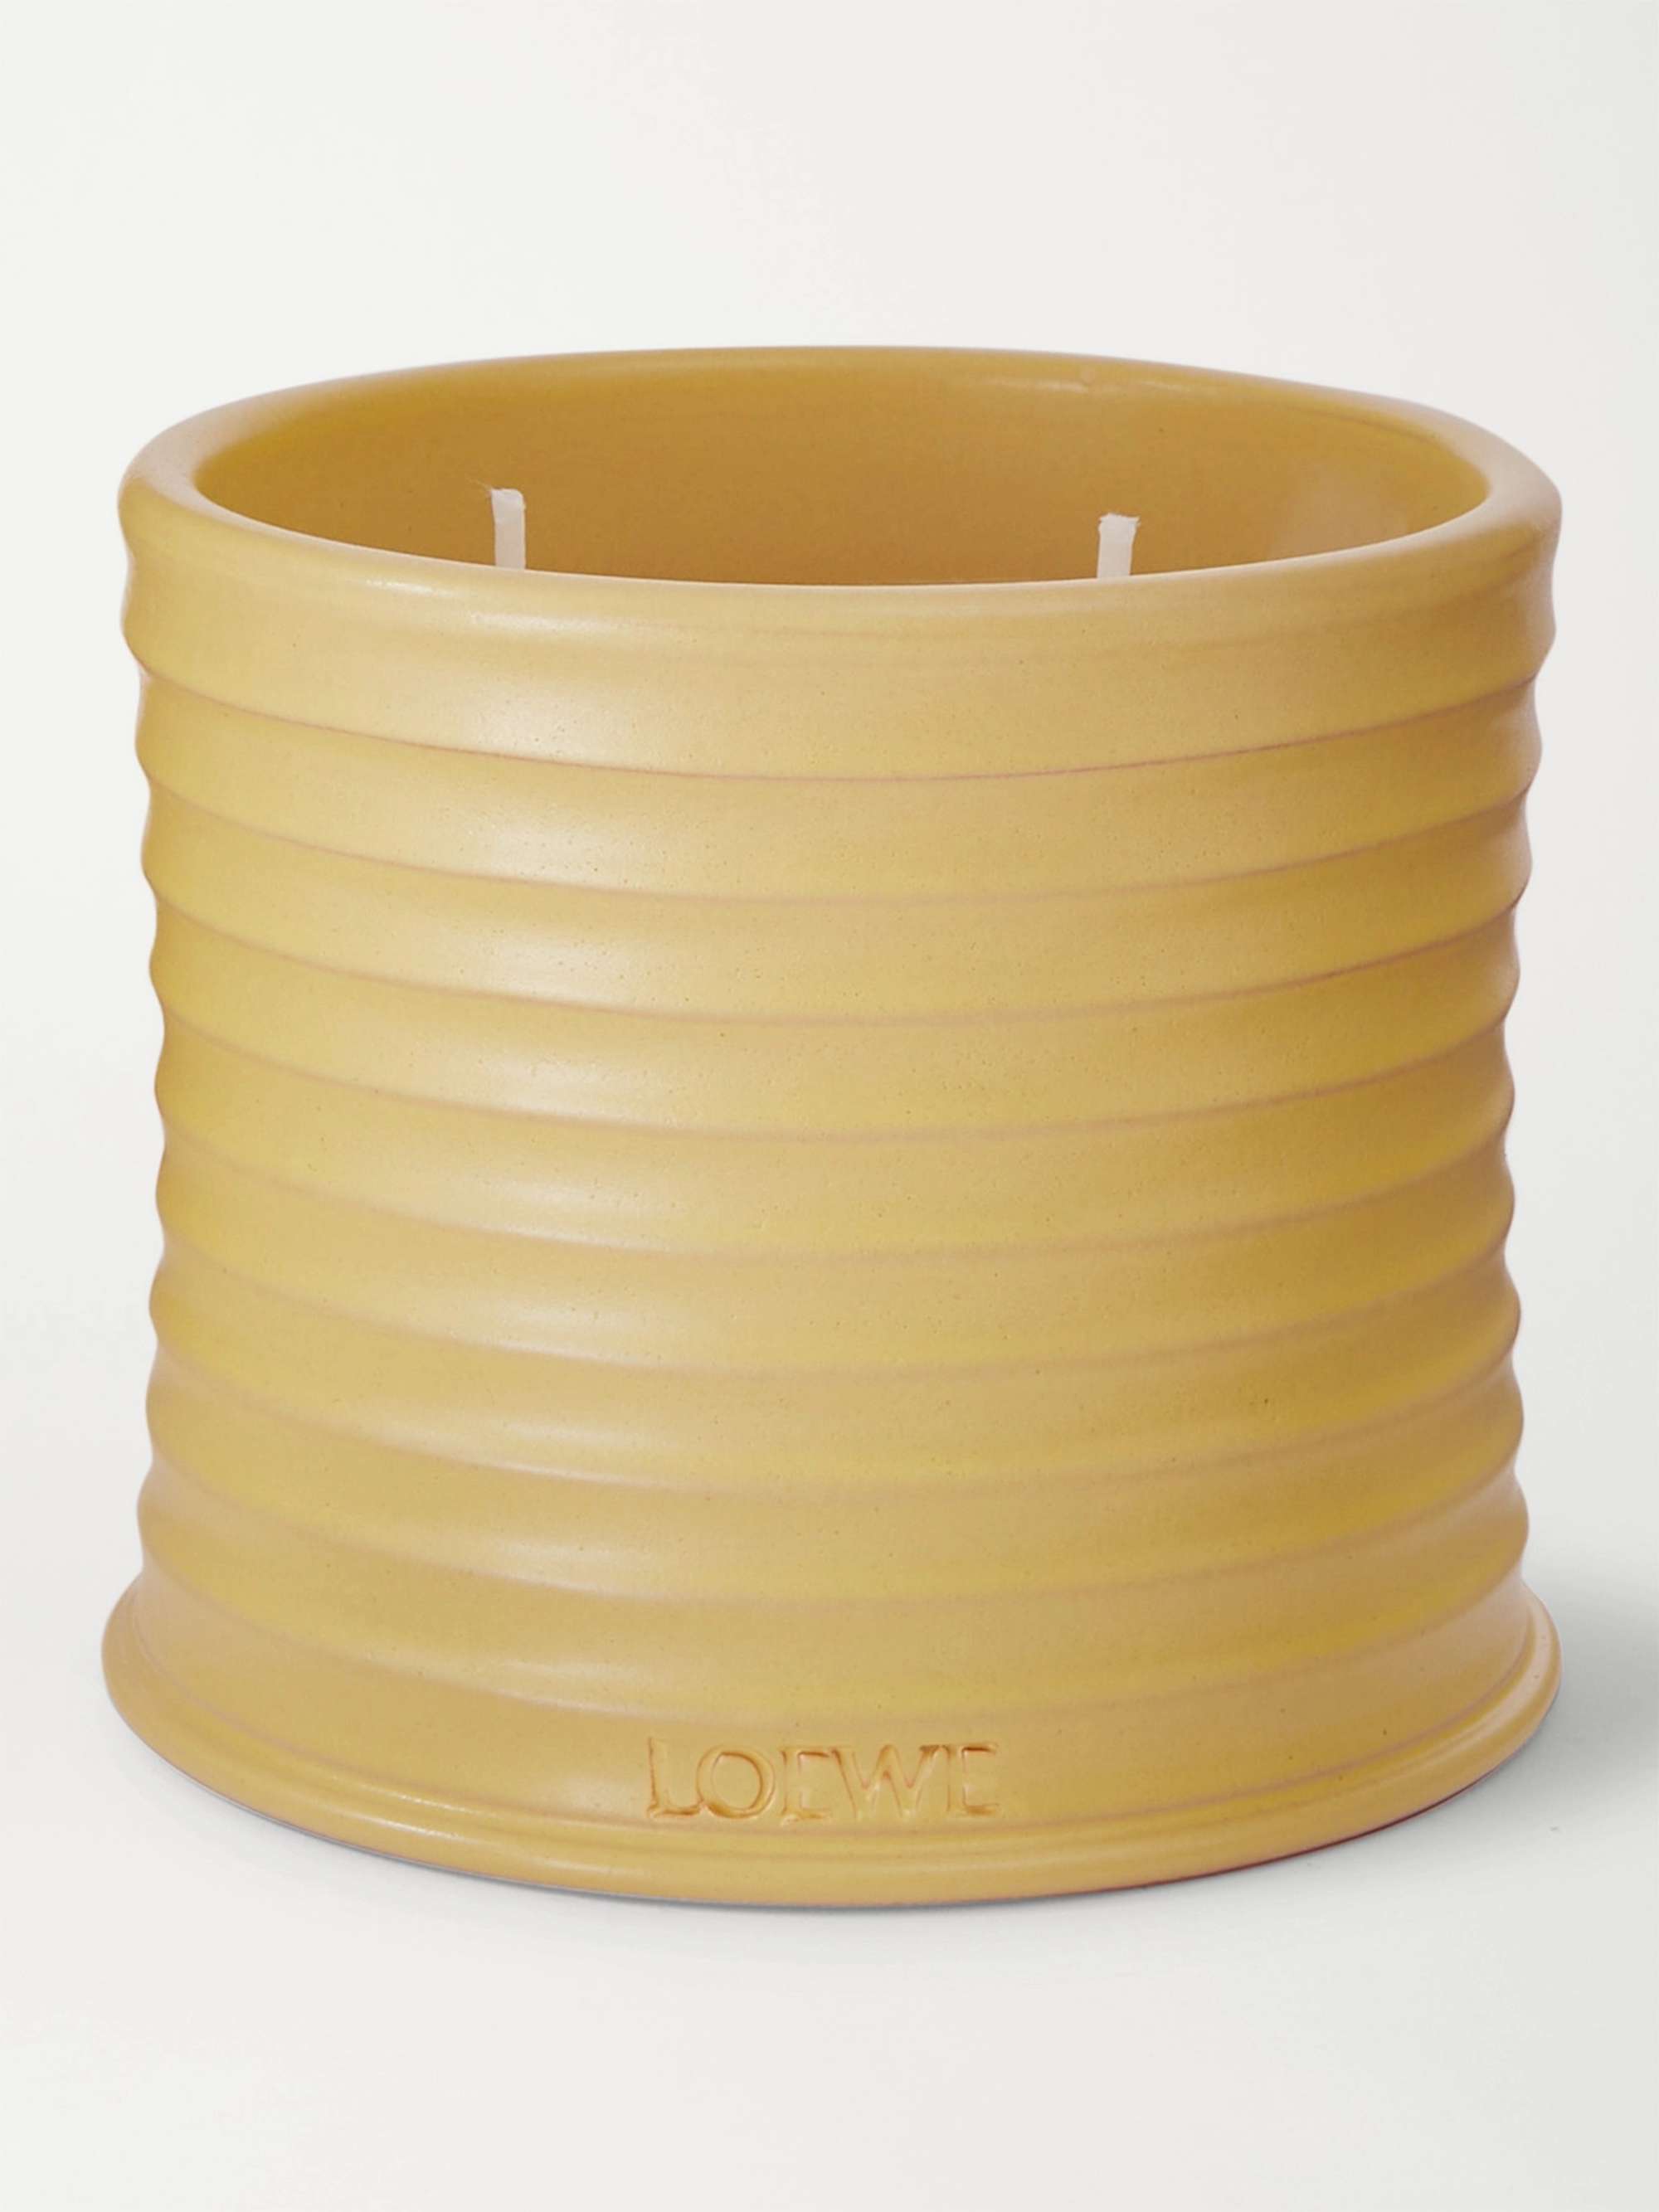 LOEWE HOME SCENTS Honeysuckle Scented Candle, 170g